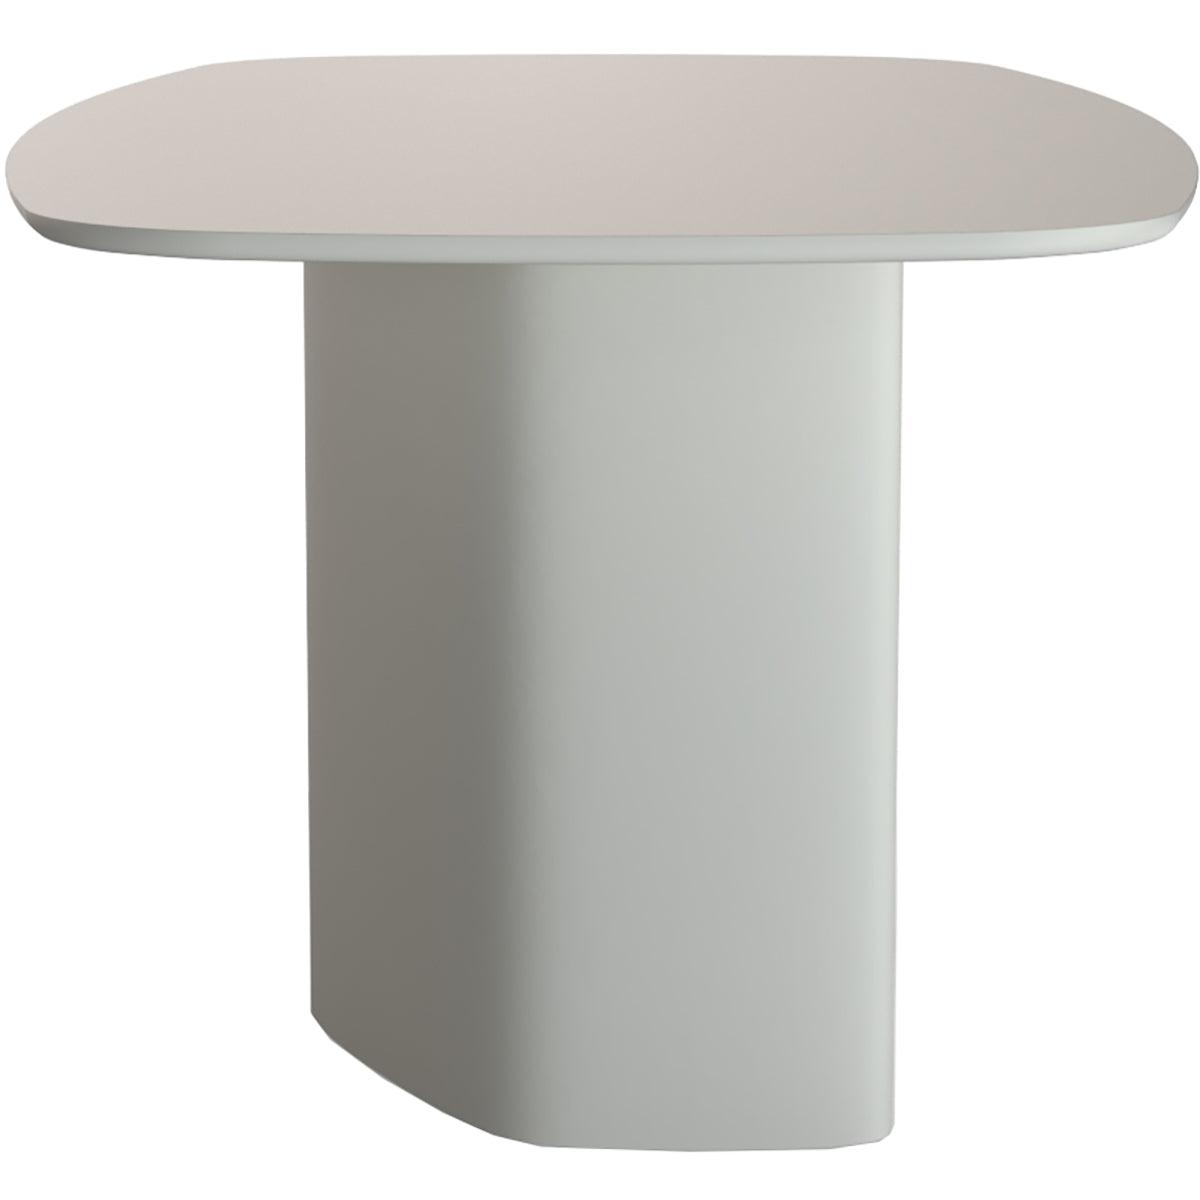 Cells ERIT Dining Table - WOO .Design